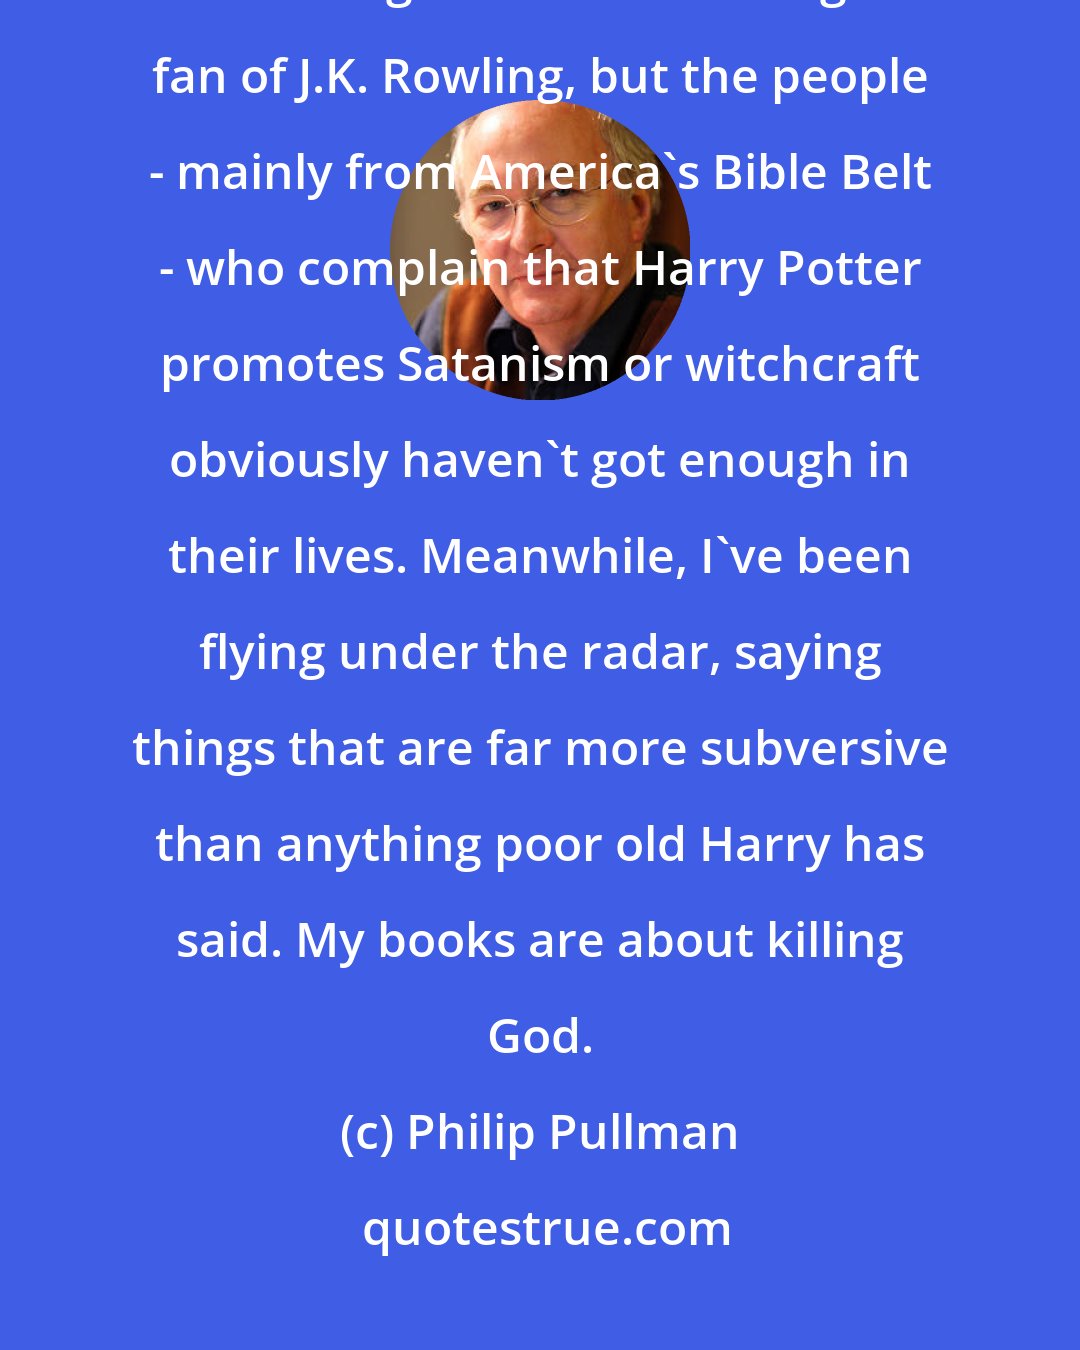 Philip Pullman: I've been surprised by how little criticism I've got. Harry Potter's been taking all the flak. I'm a great fan of J.K. Rowling, but the people - mainly from America's Bible Belt - who complain that Harry Potter promotes Satanism or witchcraft obviously haven't got enough in their lives. Meanwhile, I've been flying under the radar, saying things that are far more subversive than anything poor old Harry has said. My books are about killing God.